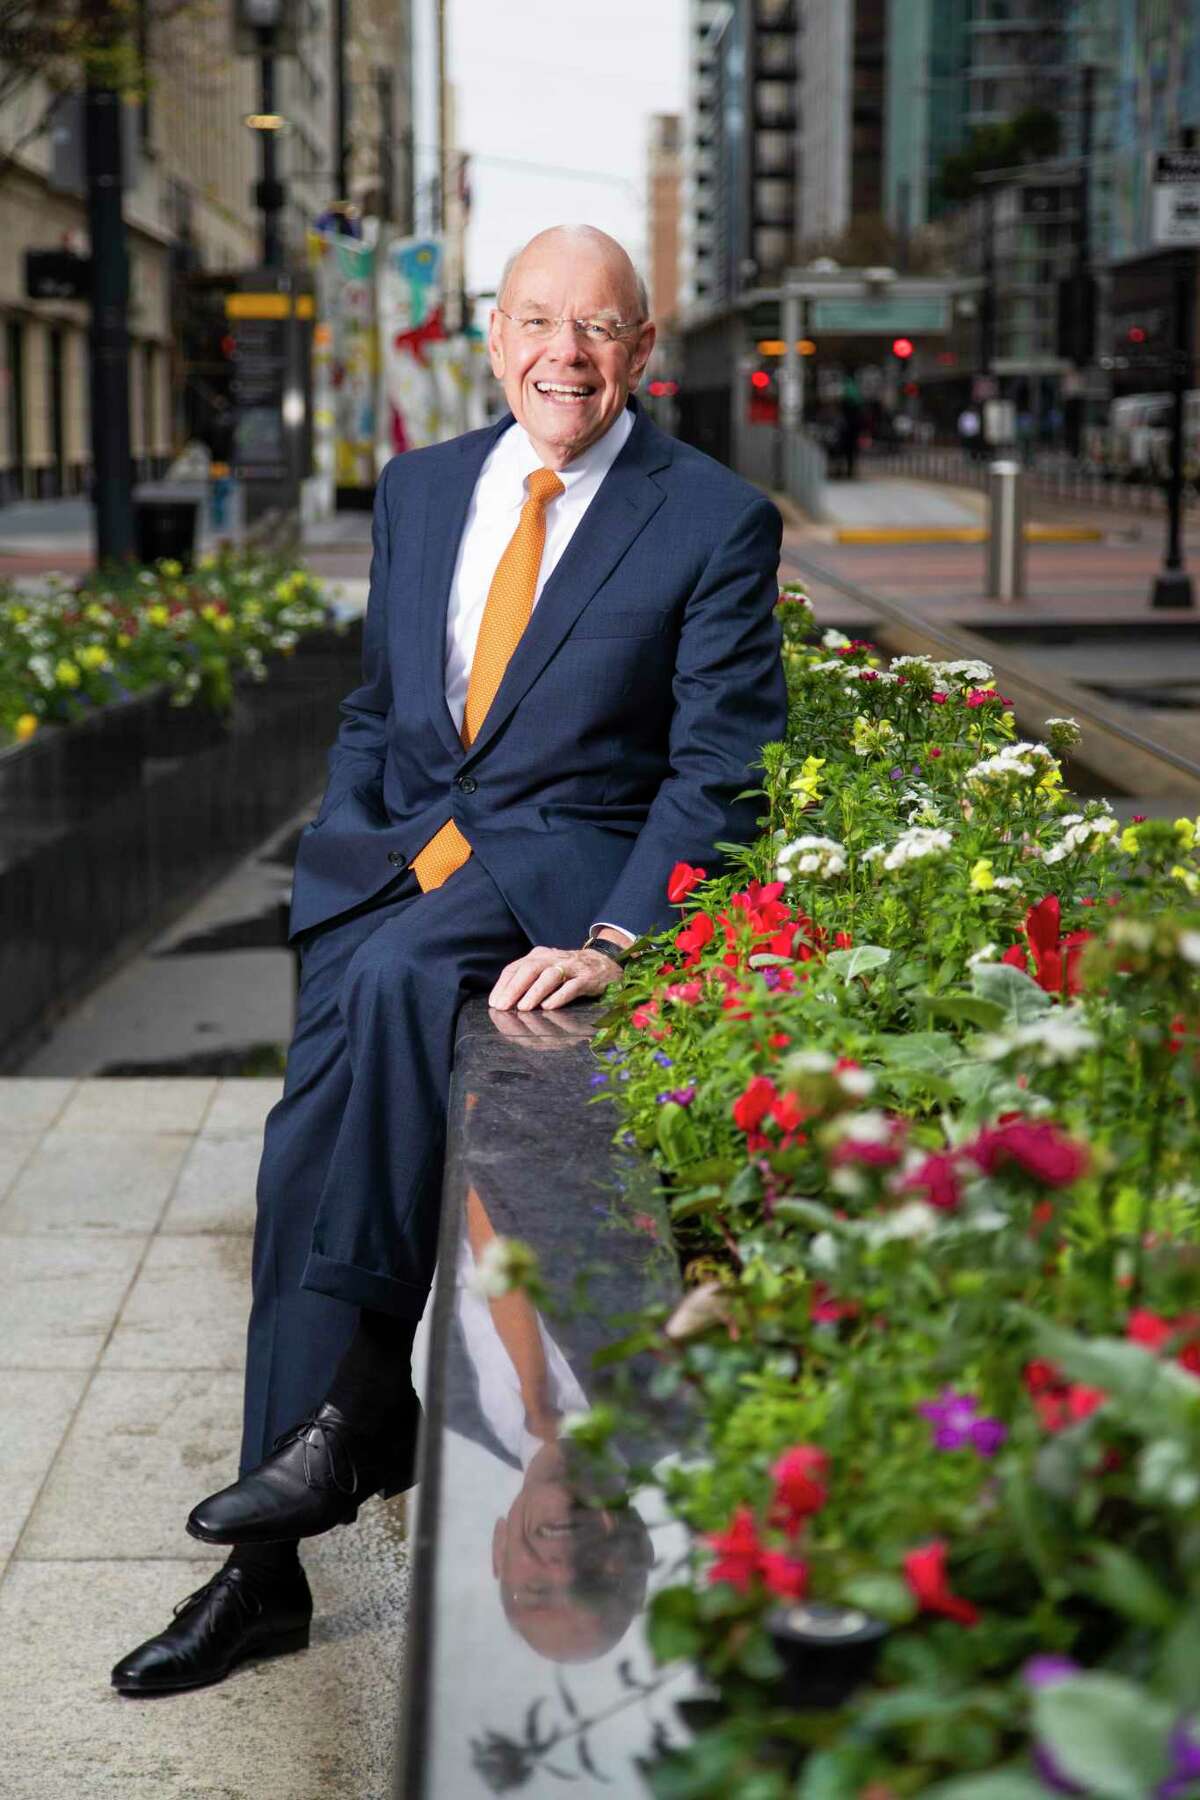 Outgoing Downtown District president Bob Eury in the downtown’s Main Street area on Wednesday, Jan. 29, 2020, in Houston.